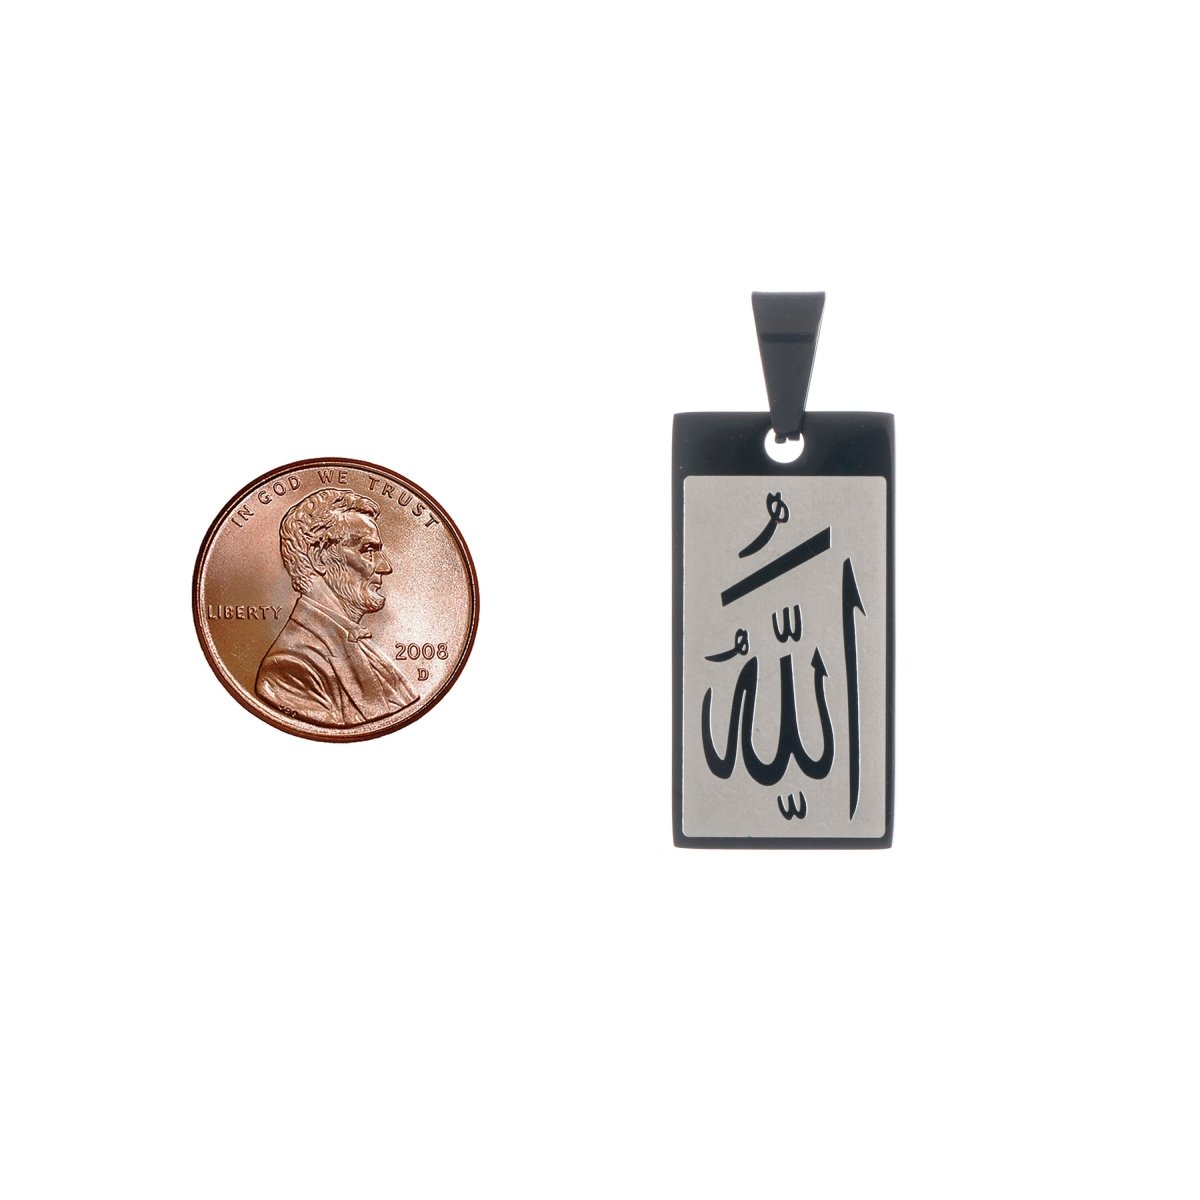 Gold, Silver Rectangular Allah Pendant Bar Frame Arabic Word Charm carved Charm for Men Necklace Jewelry Making Religious Necklace Supply J-477 - DLUXCA